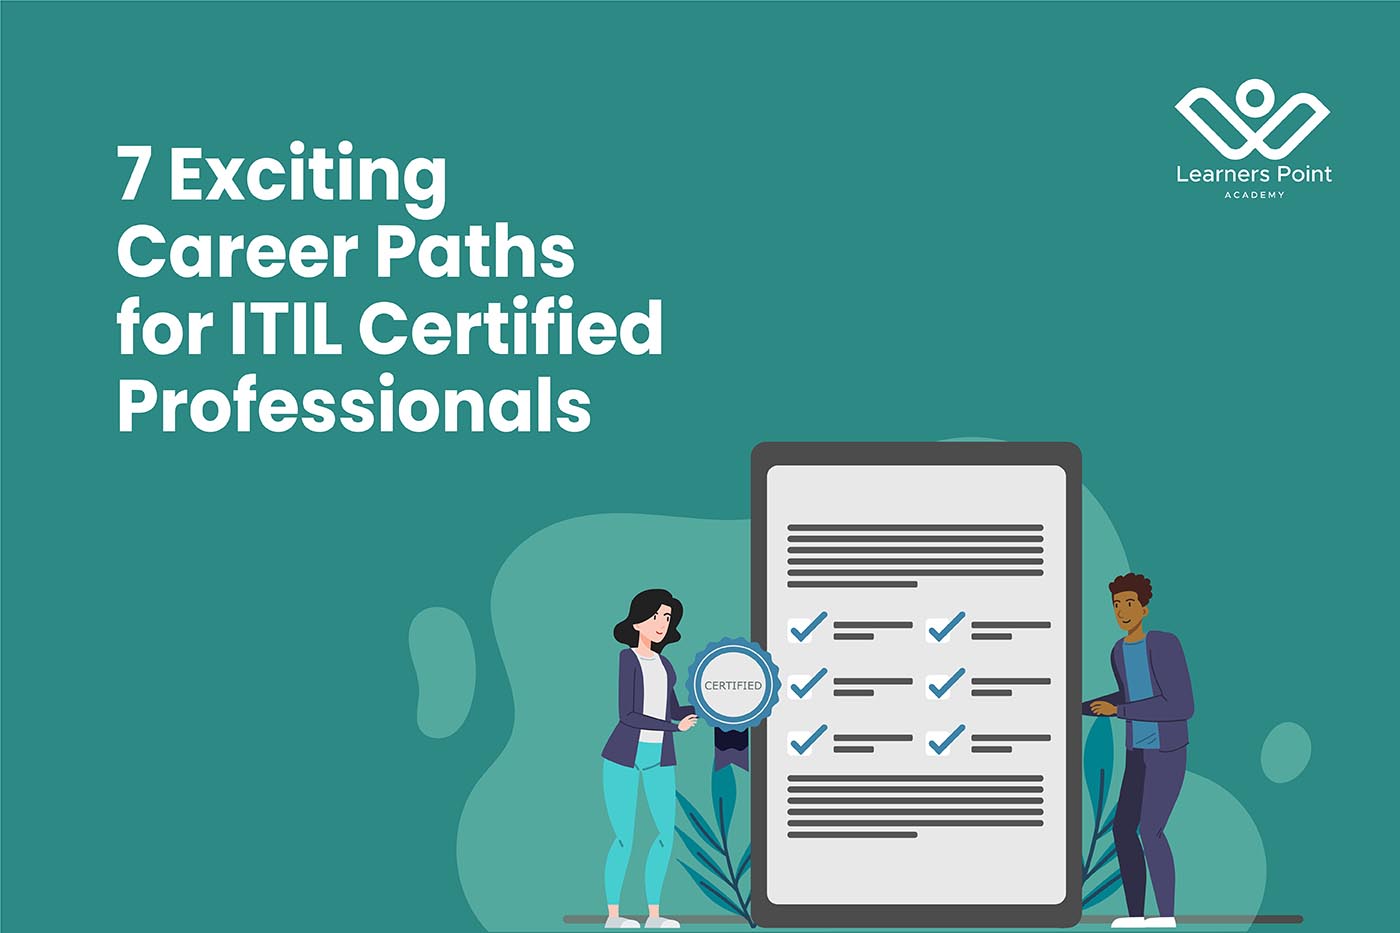 7 Exciting Career Paths for ITIL Certified Professionals